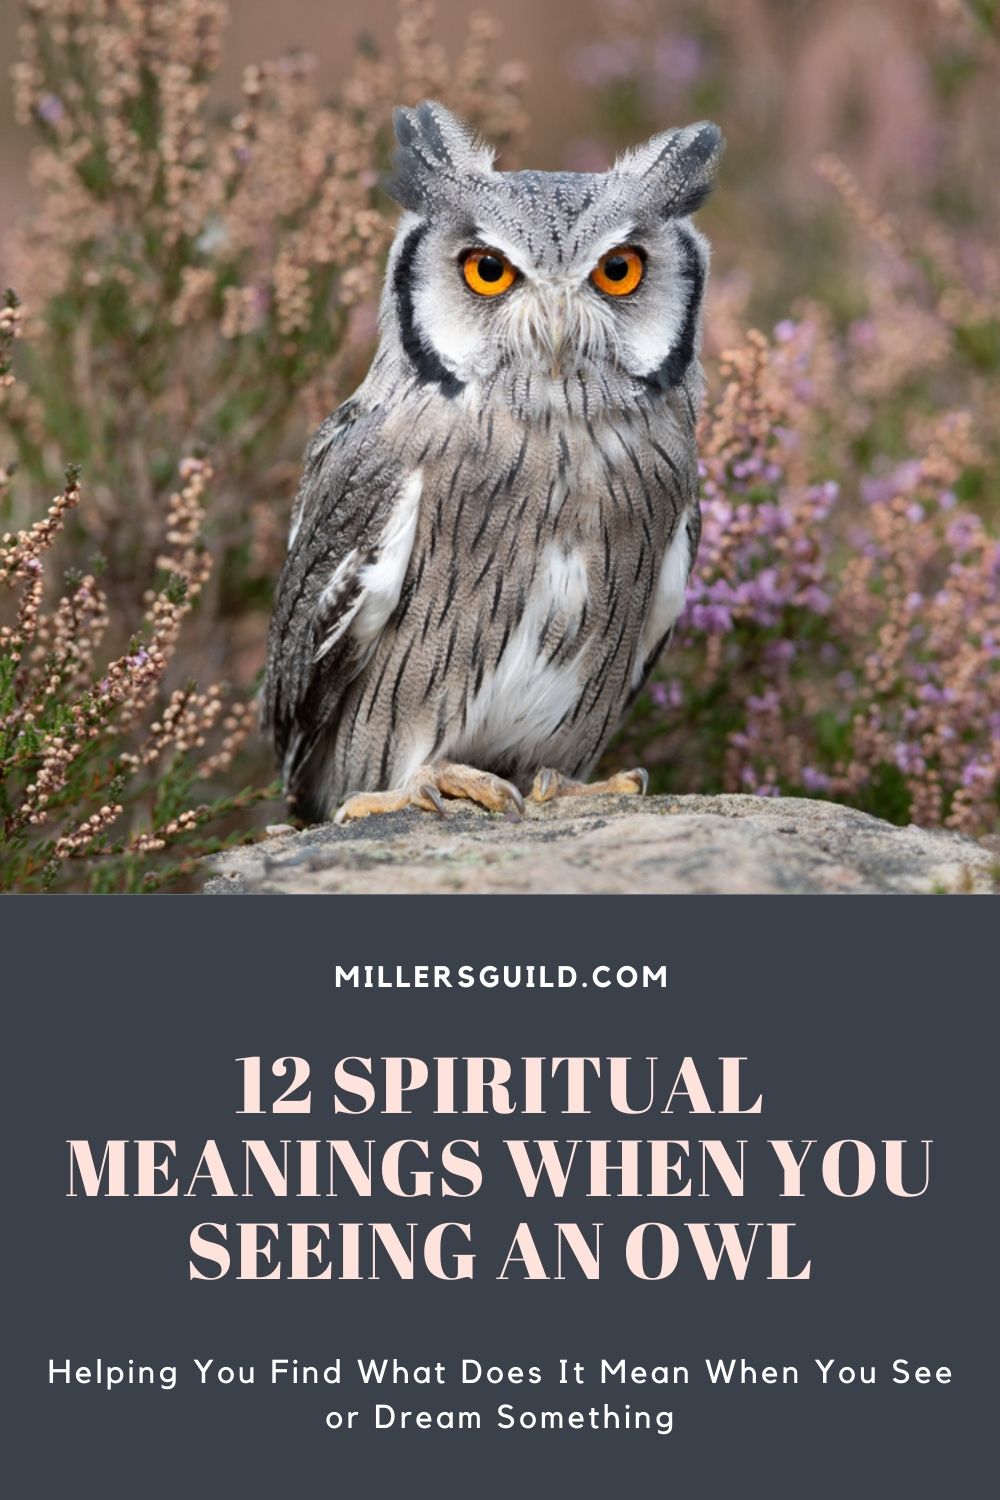 12 Spiritual Meanings When You Seeing an Owl 1